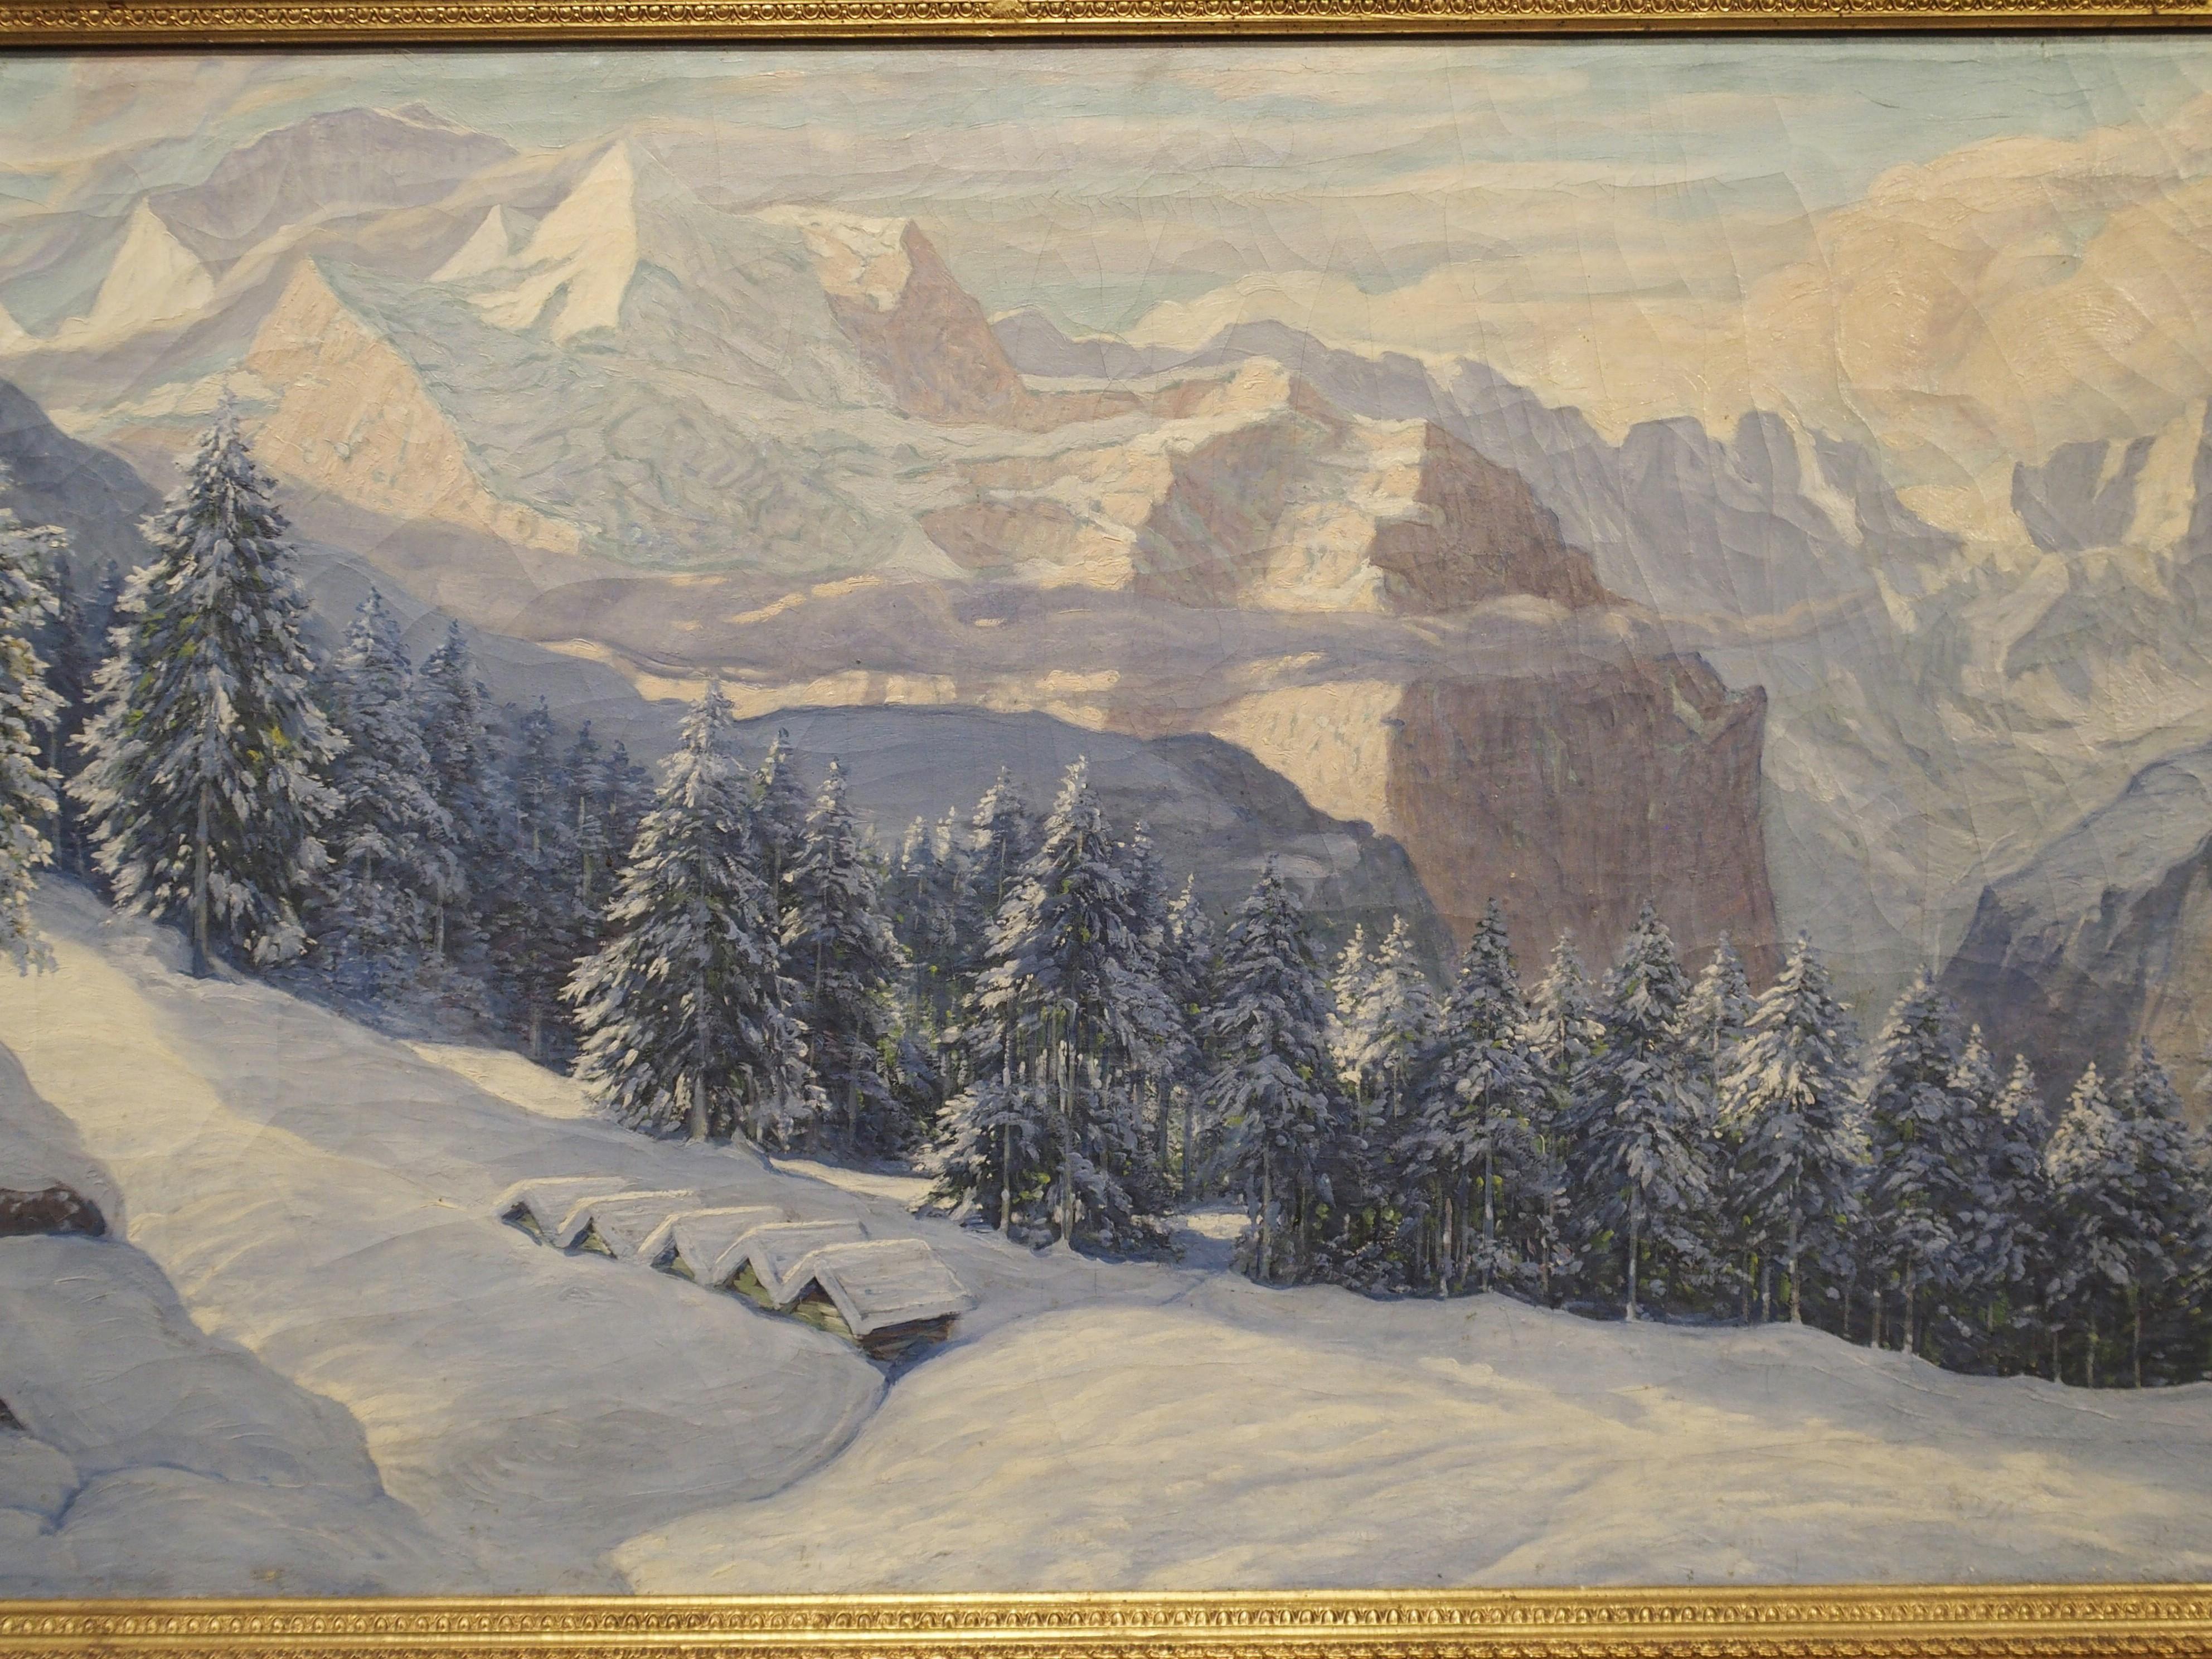 This majestic landscape painting at nearly 5 feet long (including frame) depicts a grand mountain view of the Swiss Alps in winter. It was painted by the Swiss artist Hans August Haas, born 1866 in Basel. The view looking down the pine tree covered